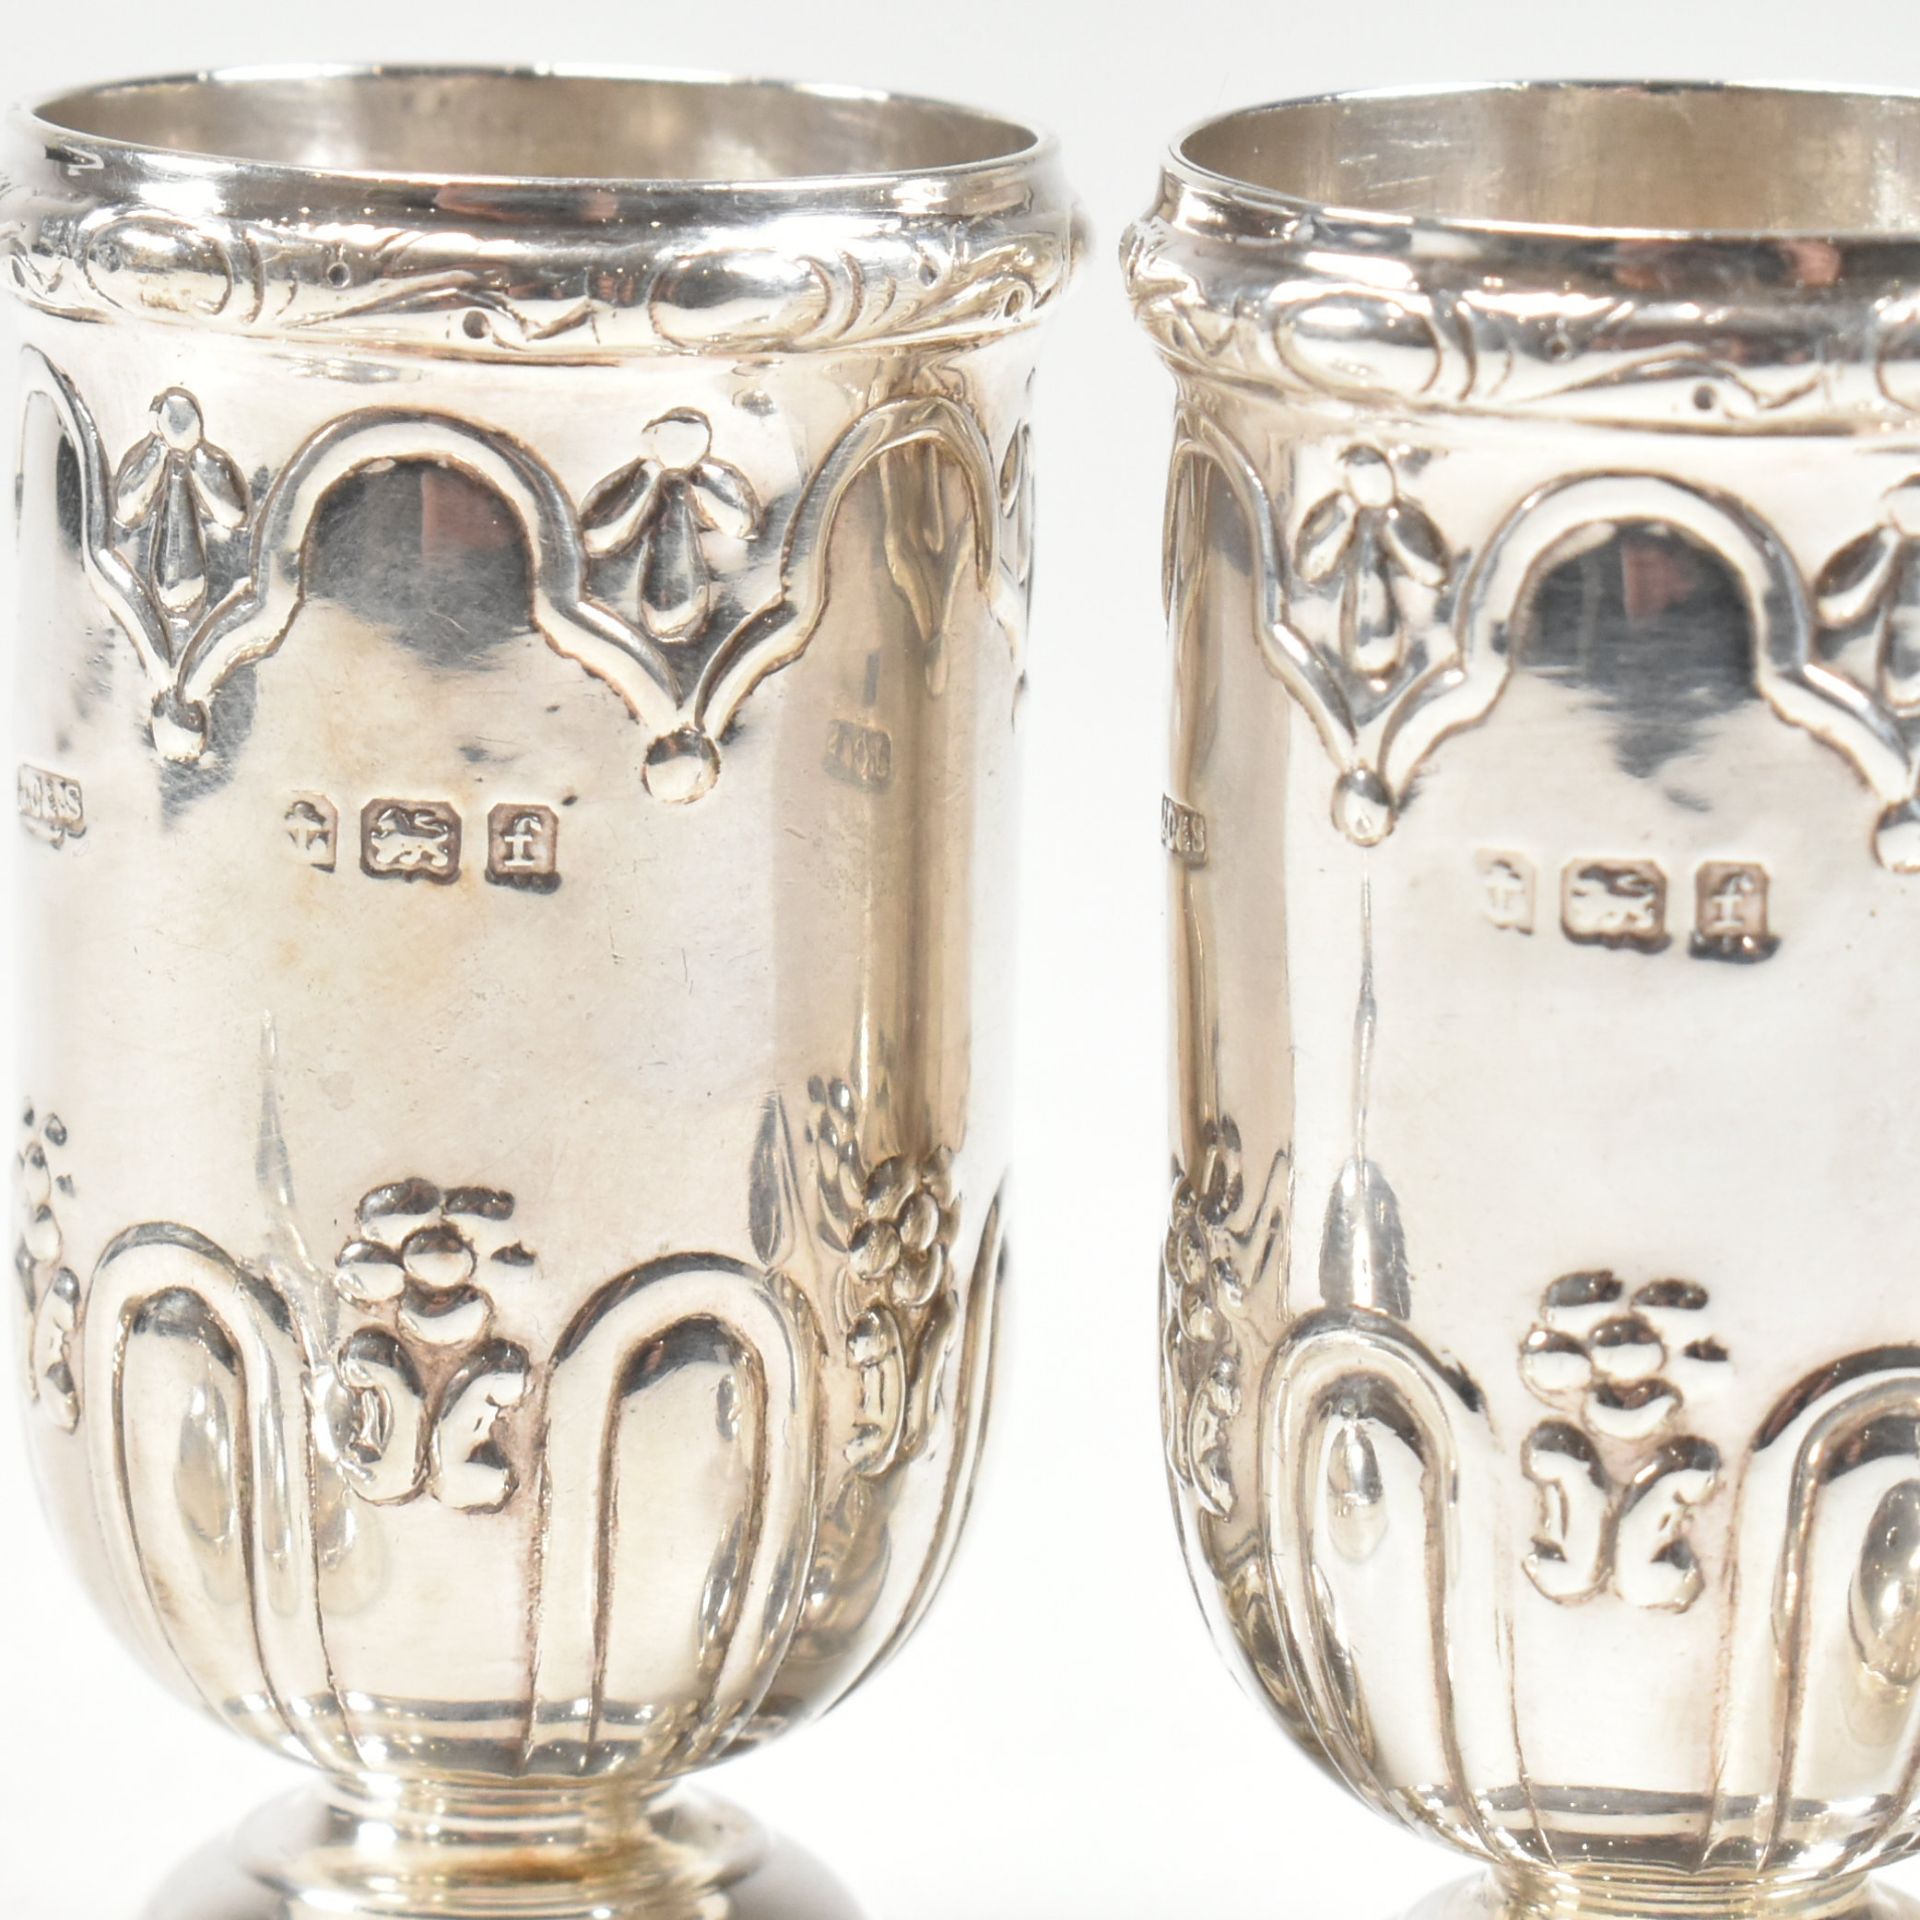 TWO EARLY 20TH CENTURY CASED HALLMARKED SILVER CRUET SETS - Image 5 of 9